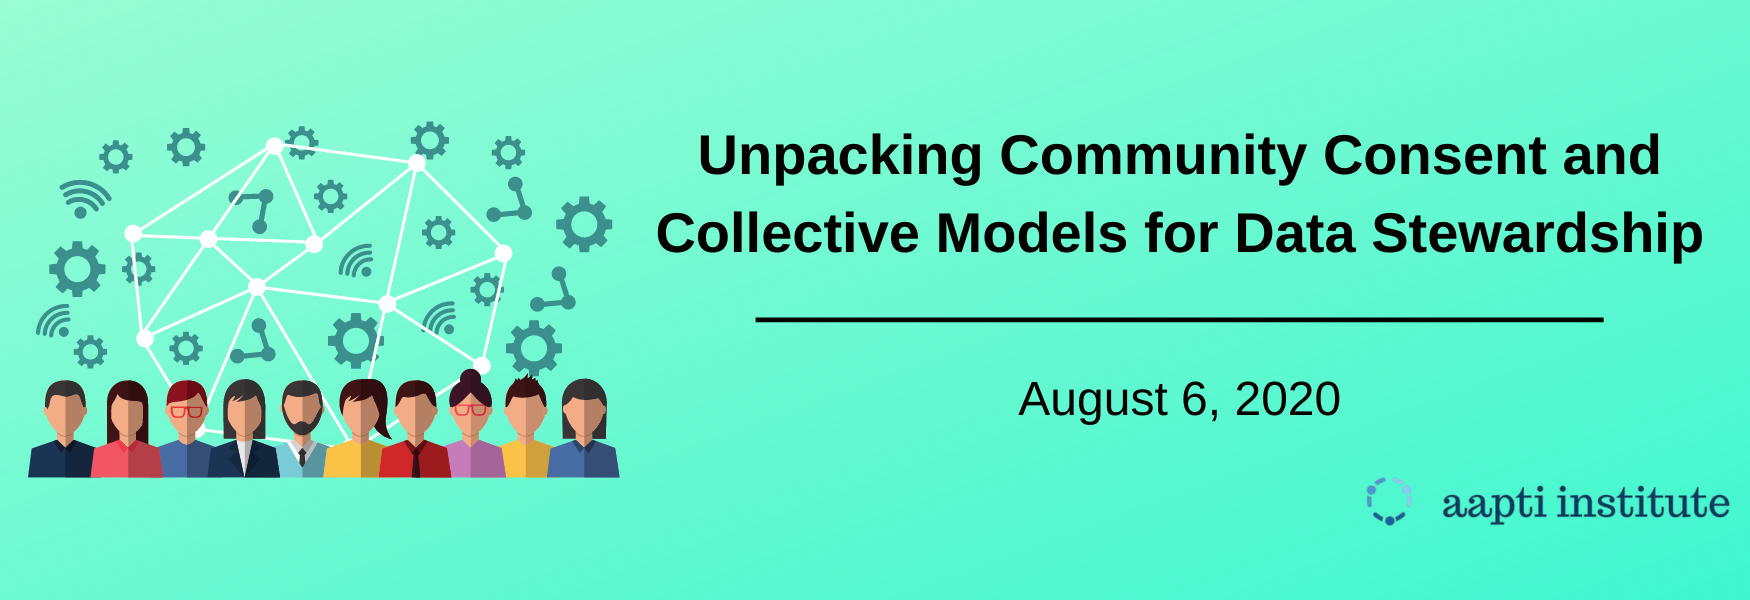 Unpacking Community Consent and Collective Models for Data Stewardship